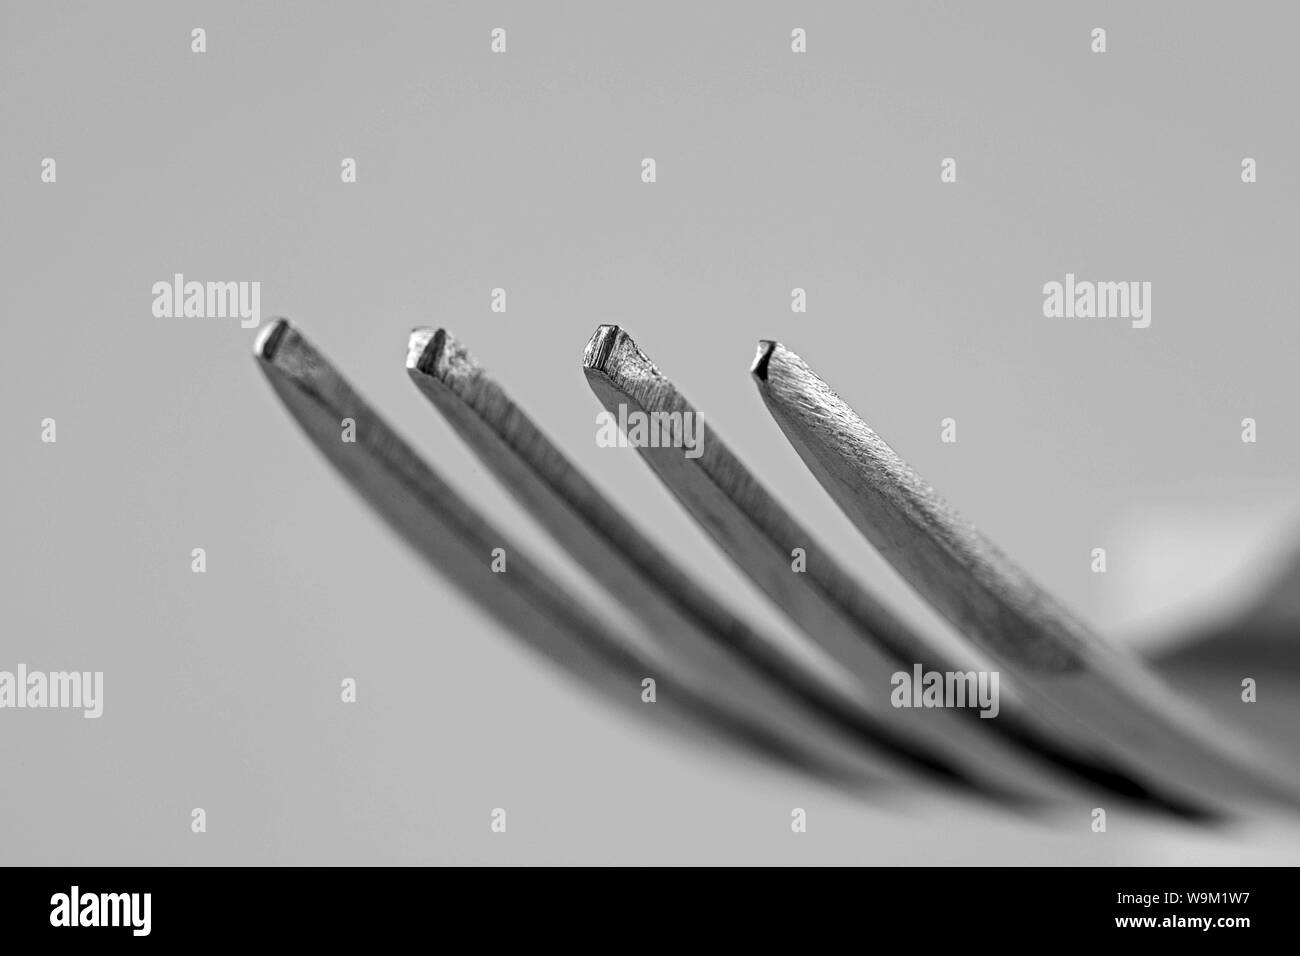 extreme close up of fork tines Stock Photo